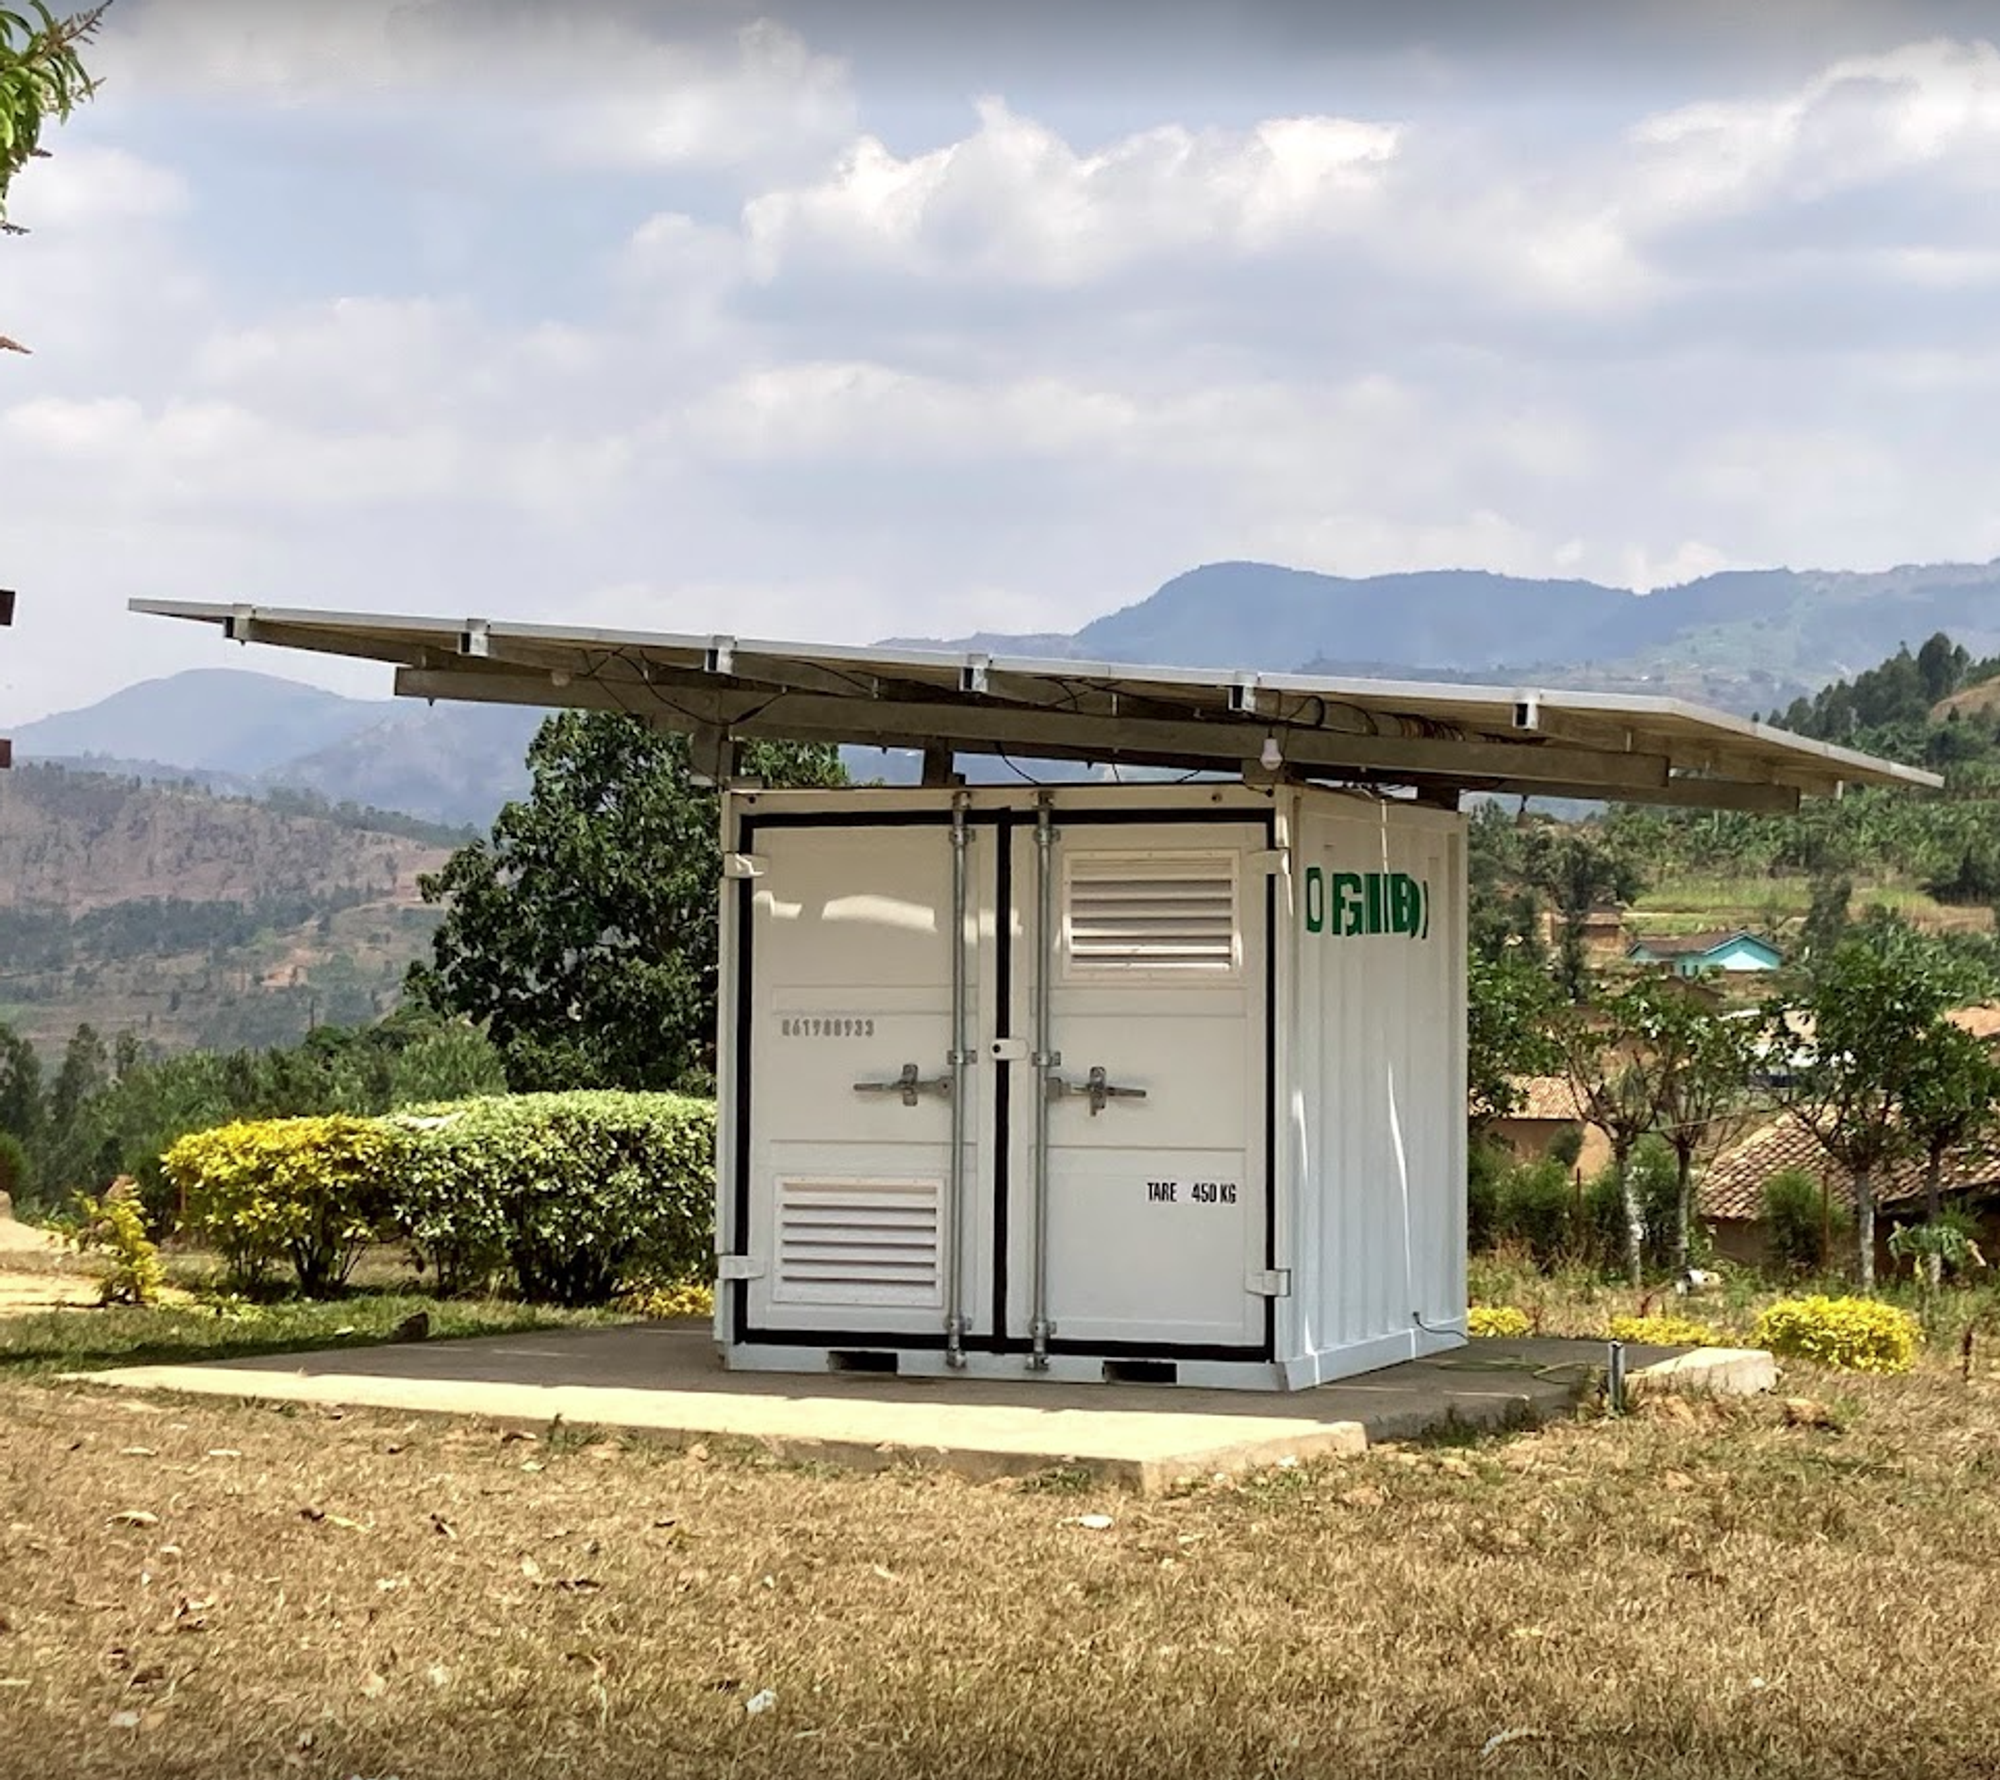 OffGridBox, a stand-alone power system, supplies power for a handful of health clinics in Rwanda through a partnership with the Ministry of Health. A PowerWatch device is also plugged in directly at the Box. (Photo credit: Samuel Miles)